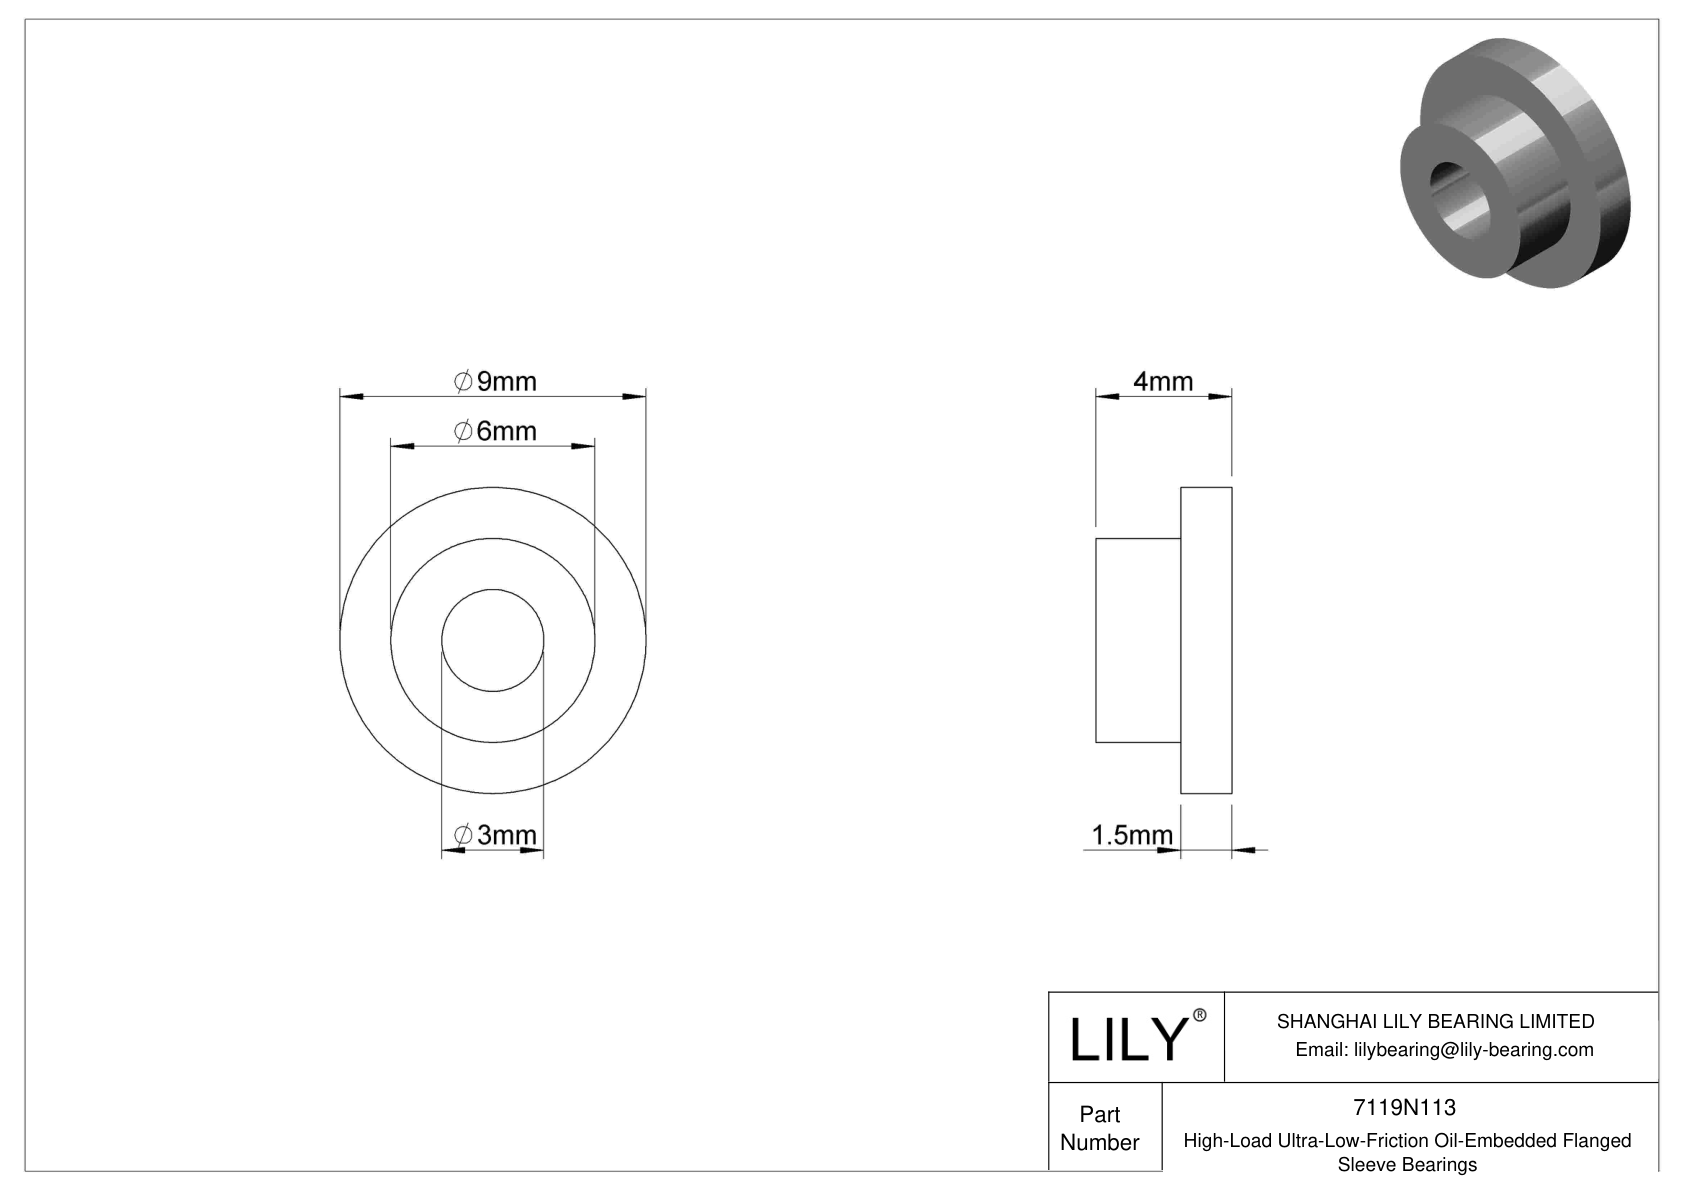 HBBJNBBD High-Load Ultra-Low-Friction Oil-Embedded Flanged Sleeve Bearings cad drawing